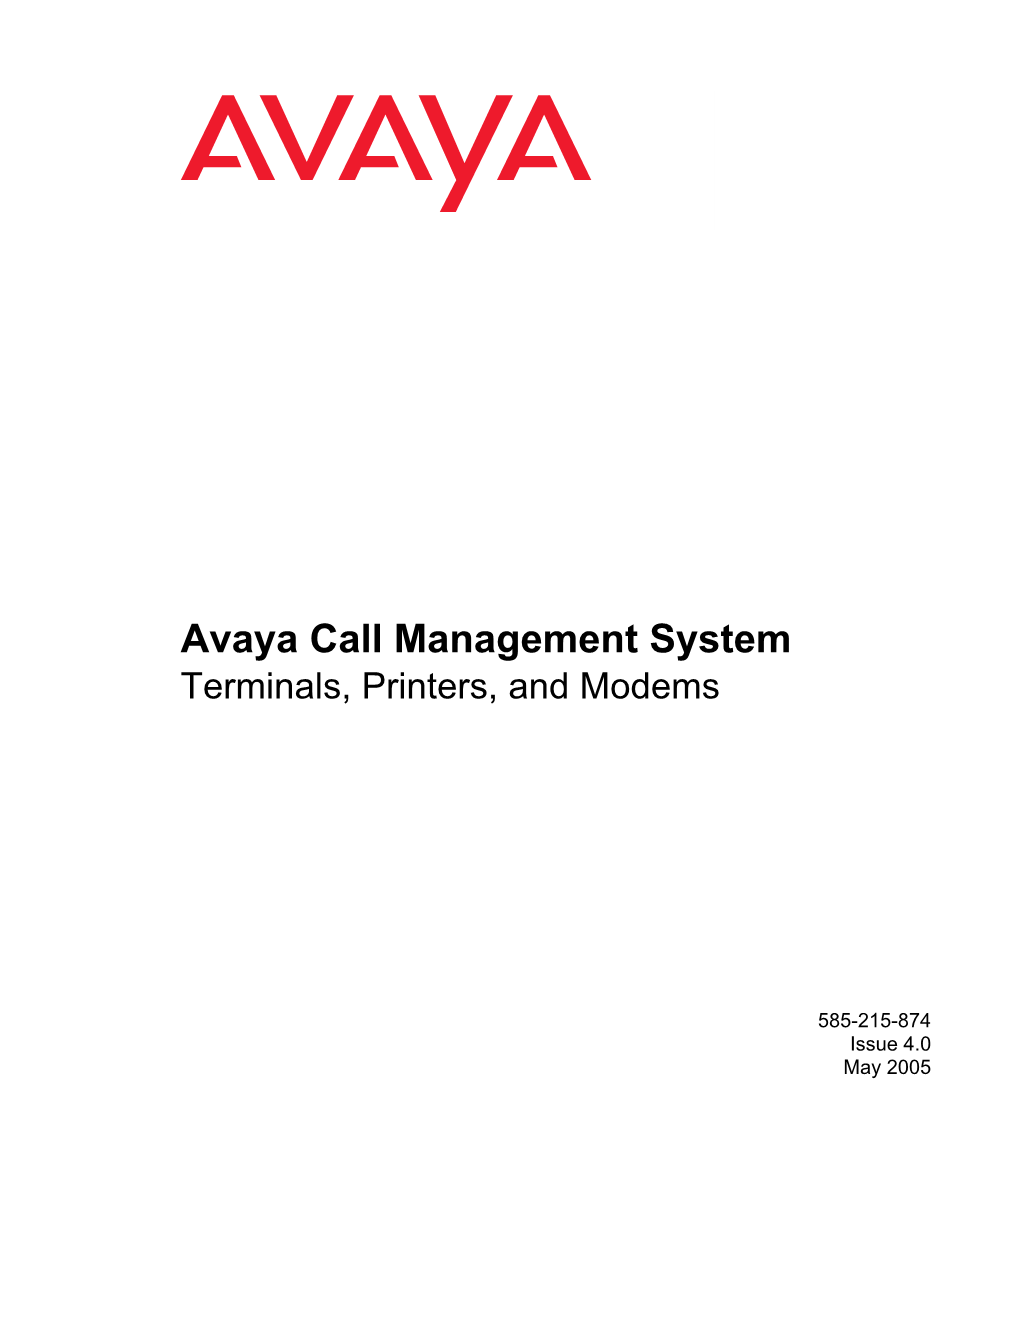 Avaya Call Management System Terminals, Printers, and Modems